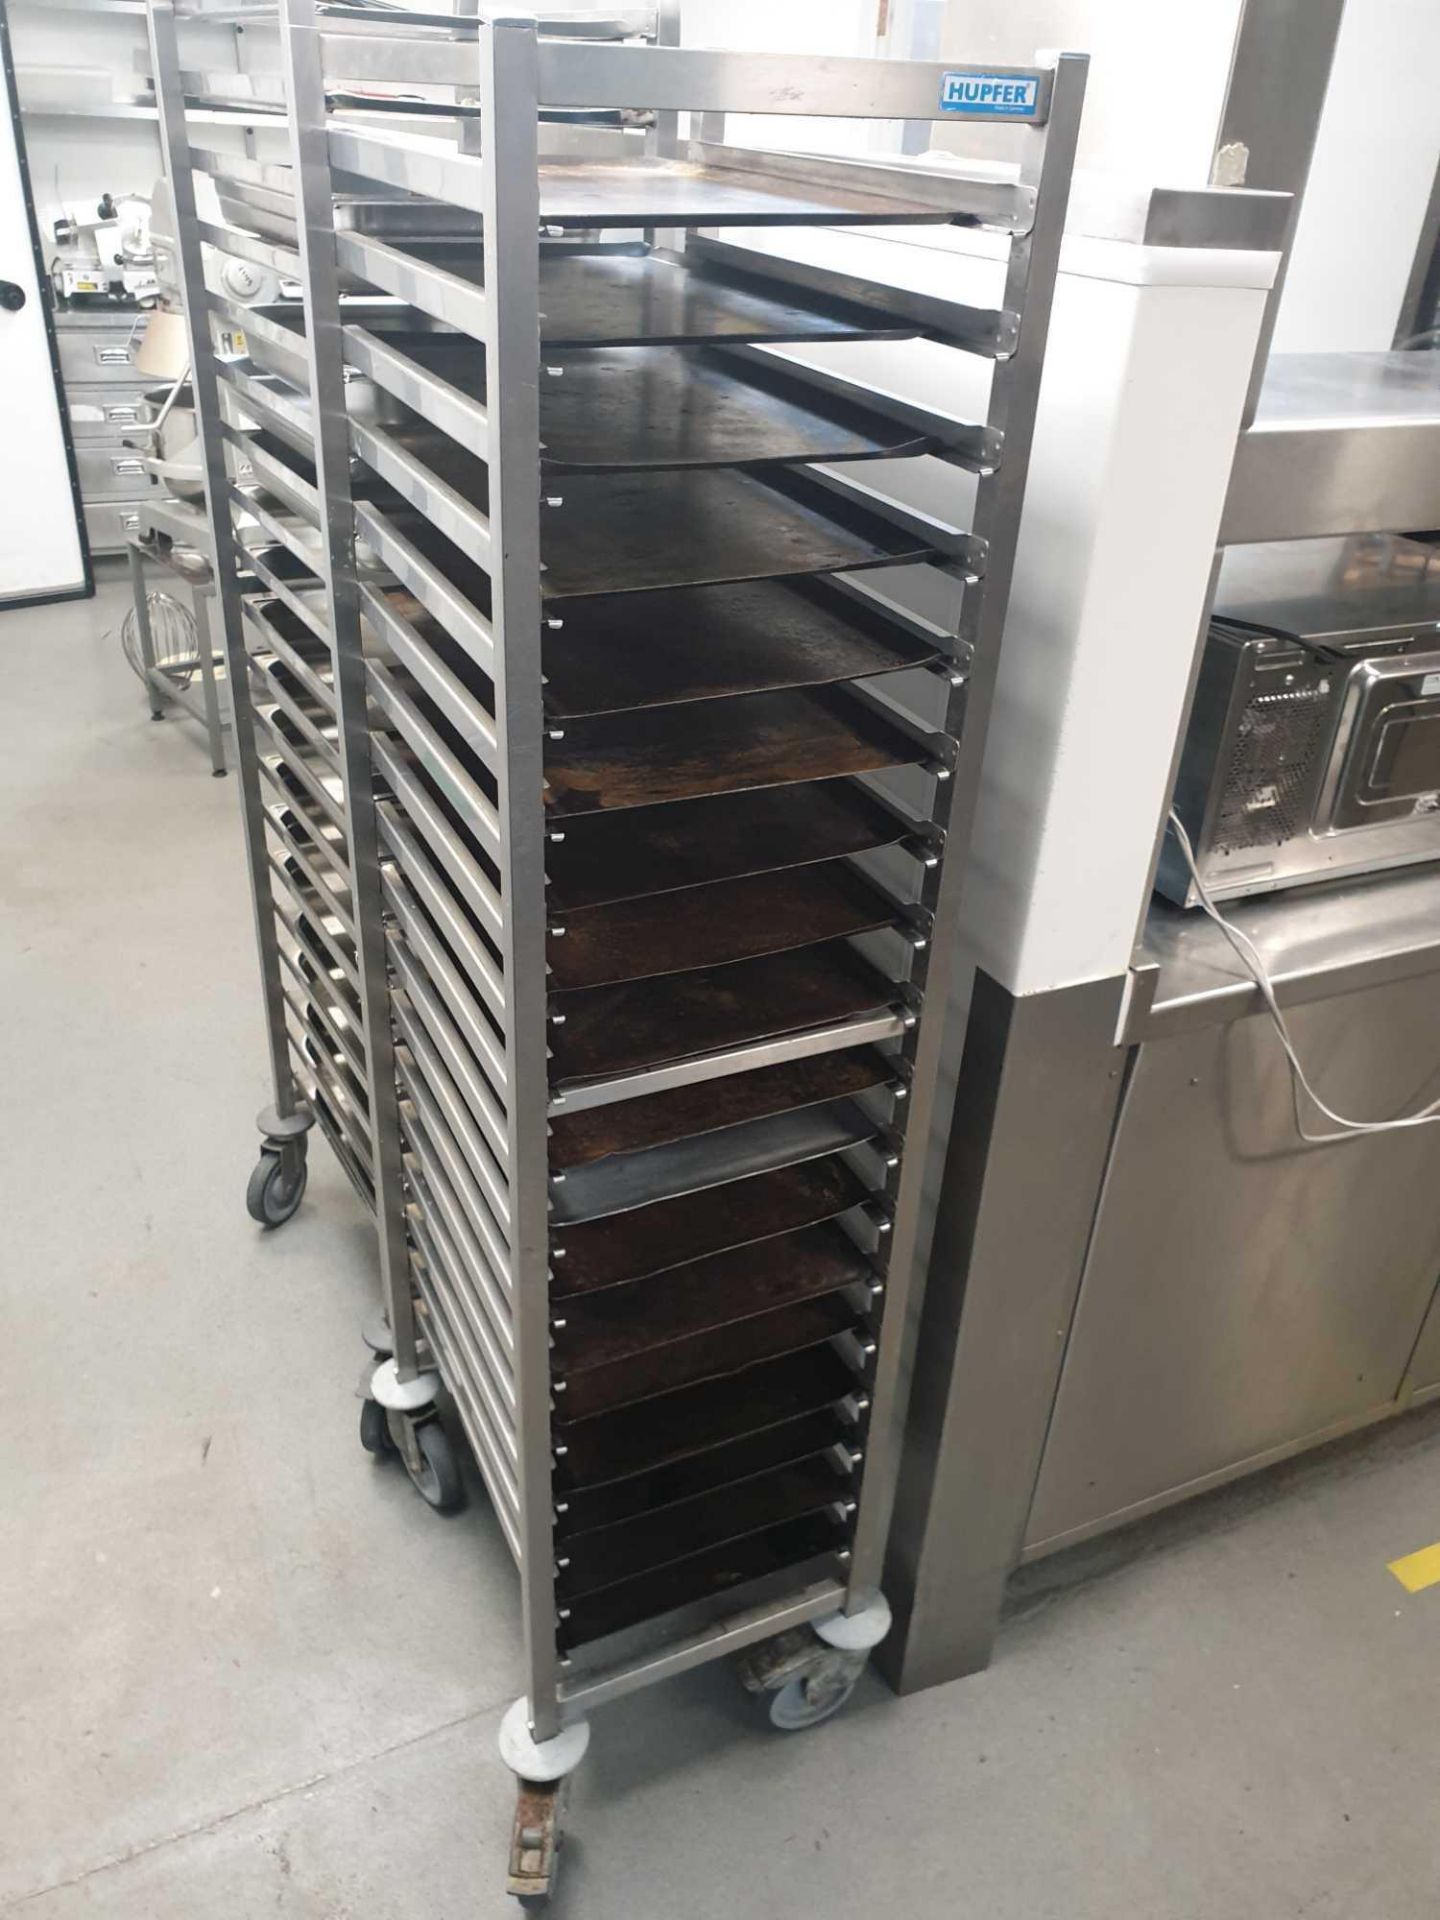 Hupfer Mobile 18 Tier Stainless Steel Rack With Trays 380mmx 550mmx 1600mm